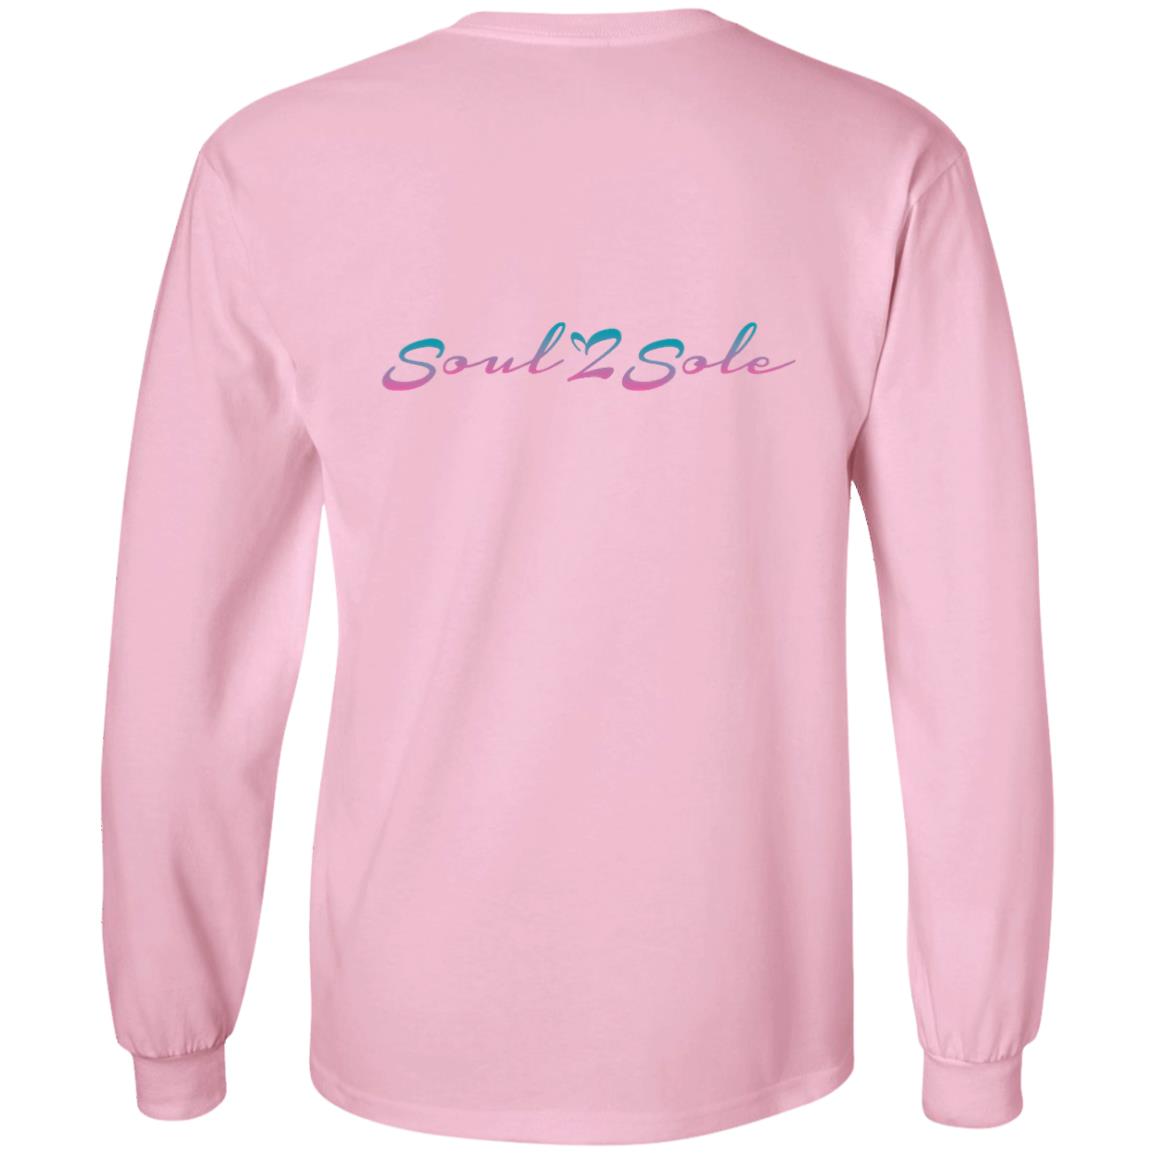 S2S personalized Long Sleeve Ultra Cotton T-Shirt